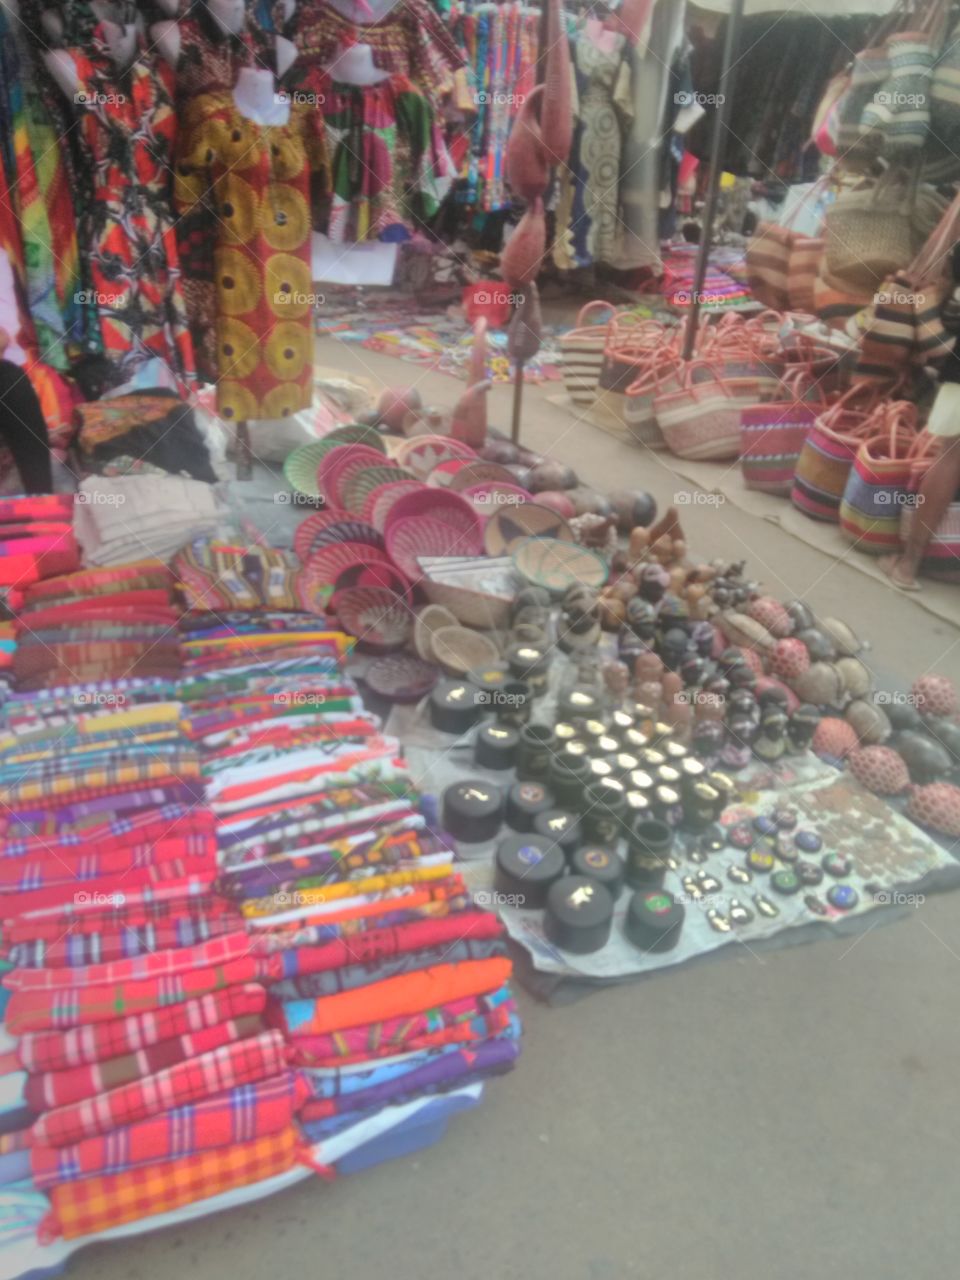 This photo shows African cultural items. They include  African baskets, African 'kitenge' attires, stone carvings, the Maasai community 'shukas' etc.